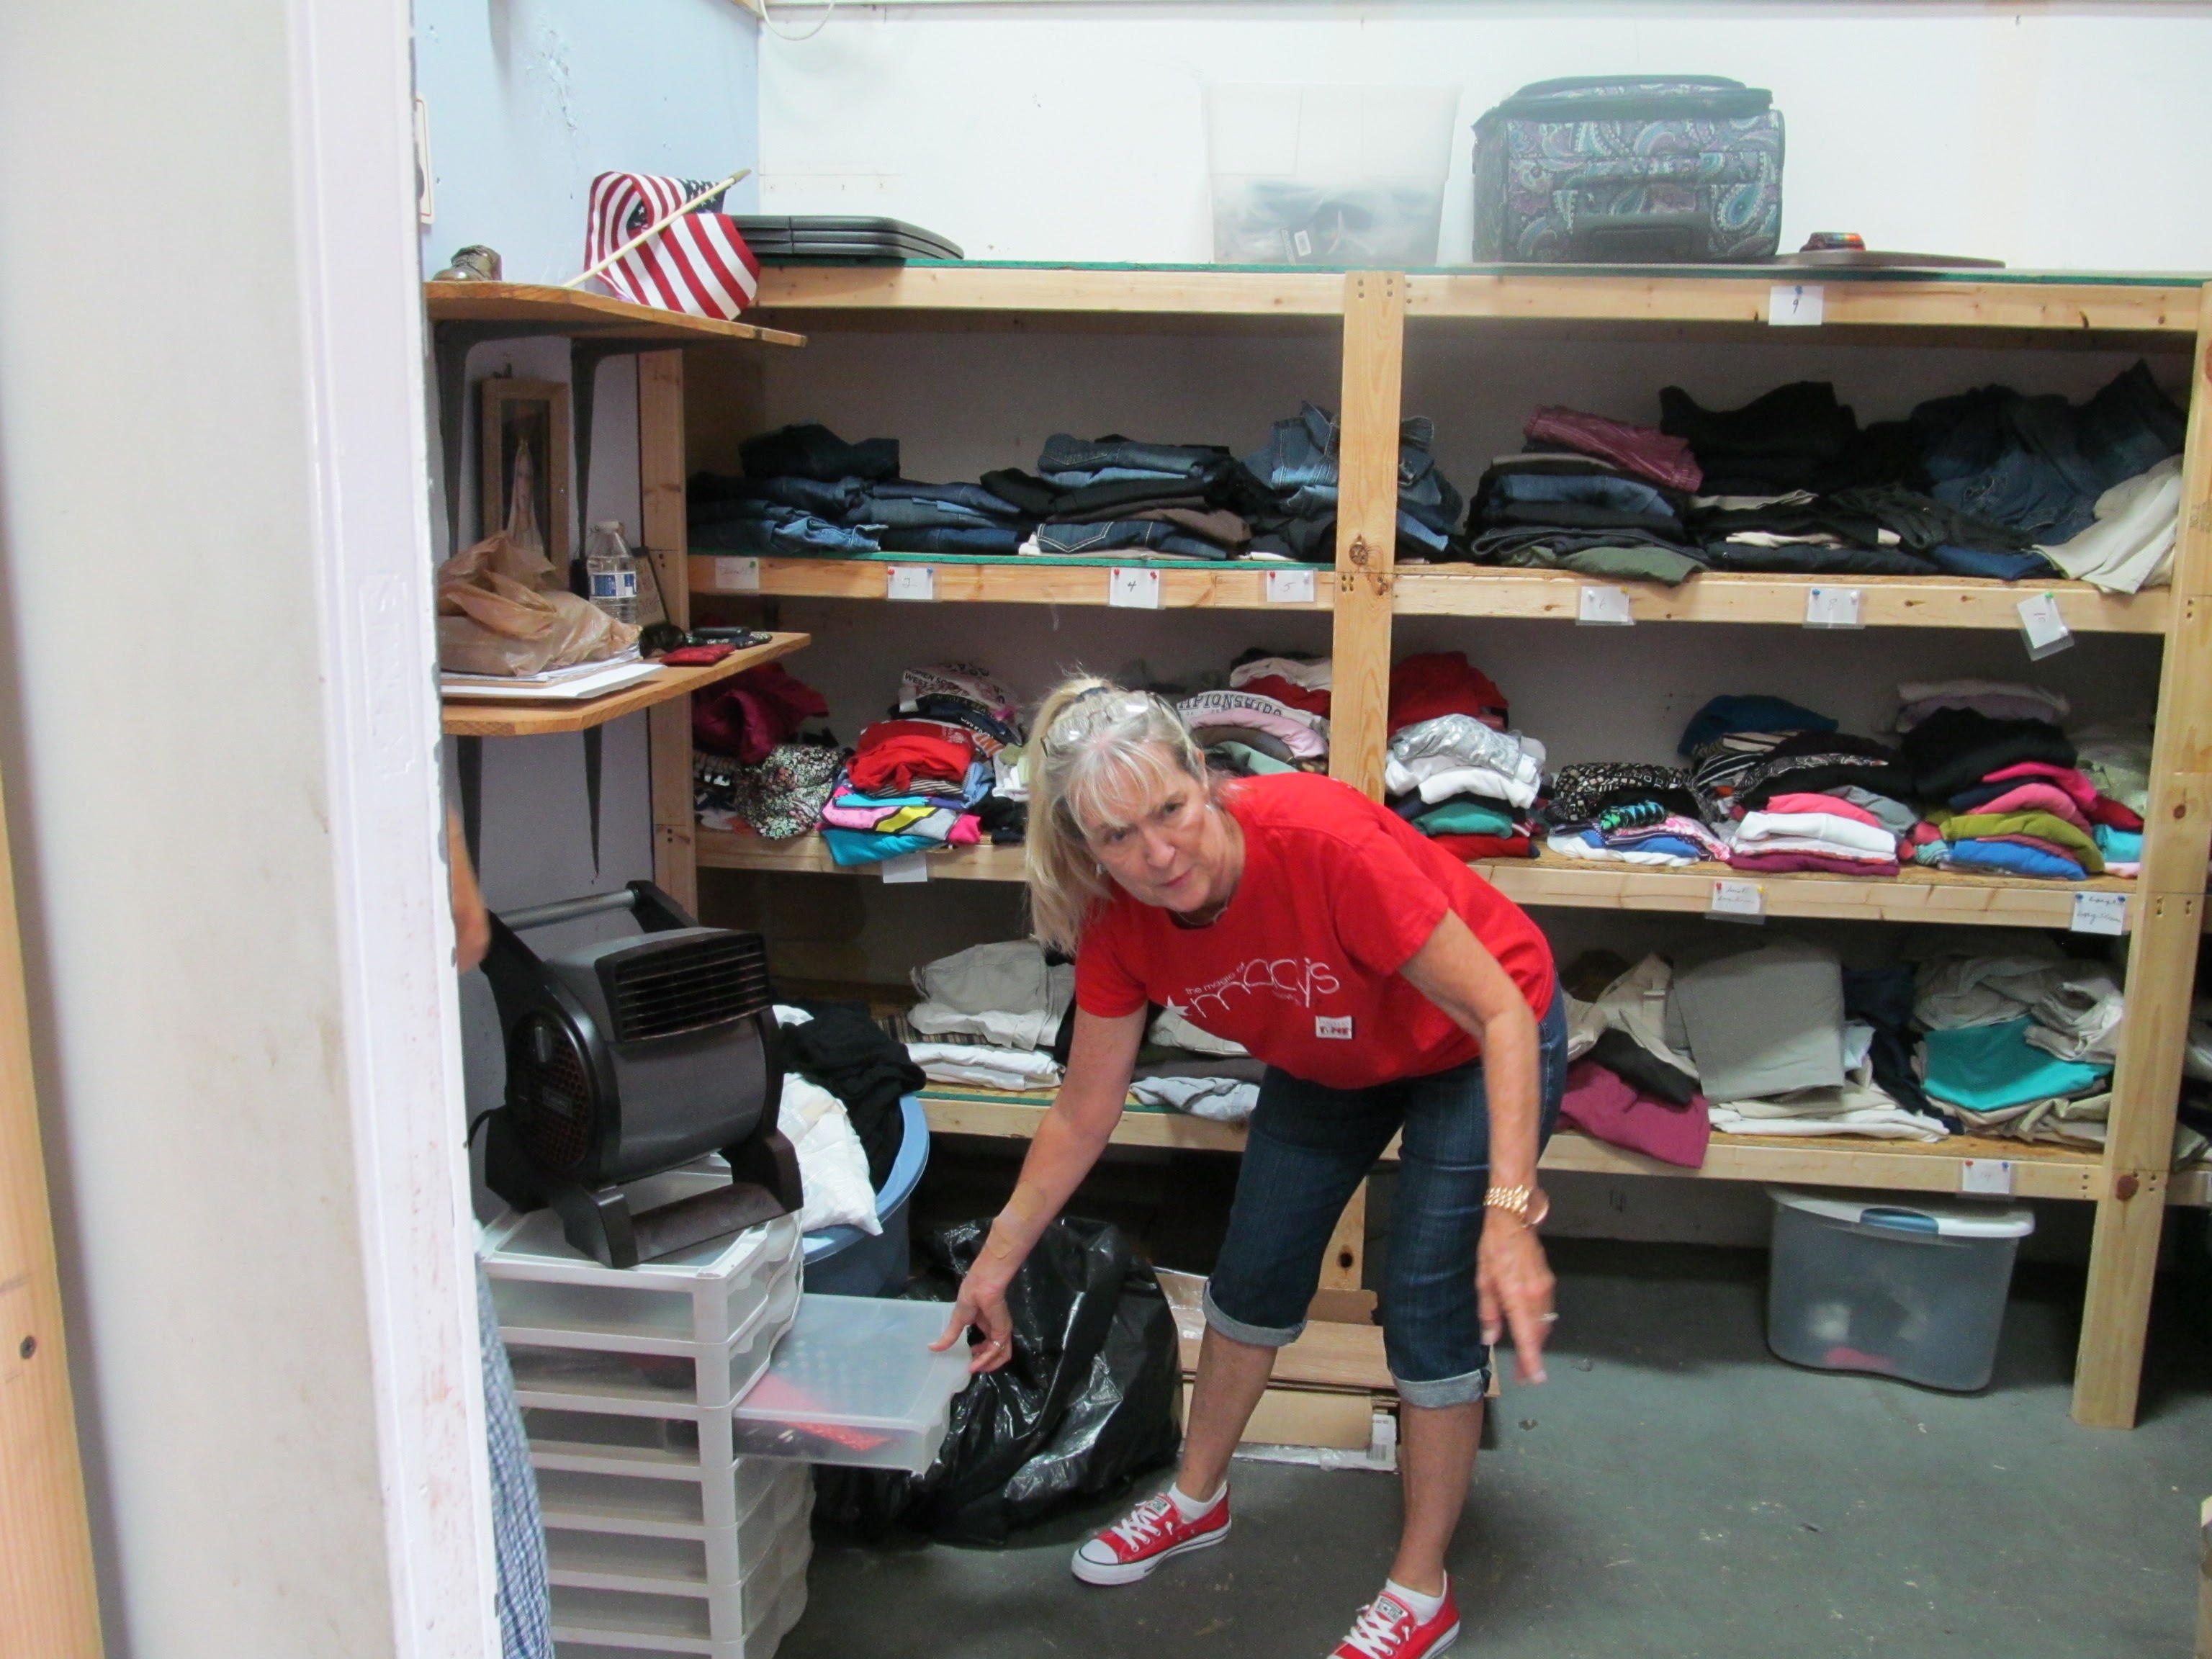 A member of non profit organization shows donated clothes.